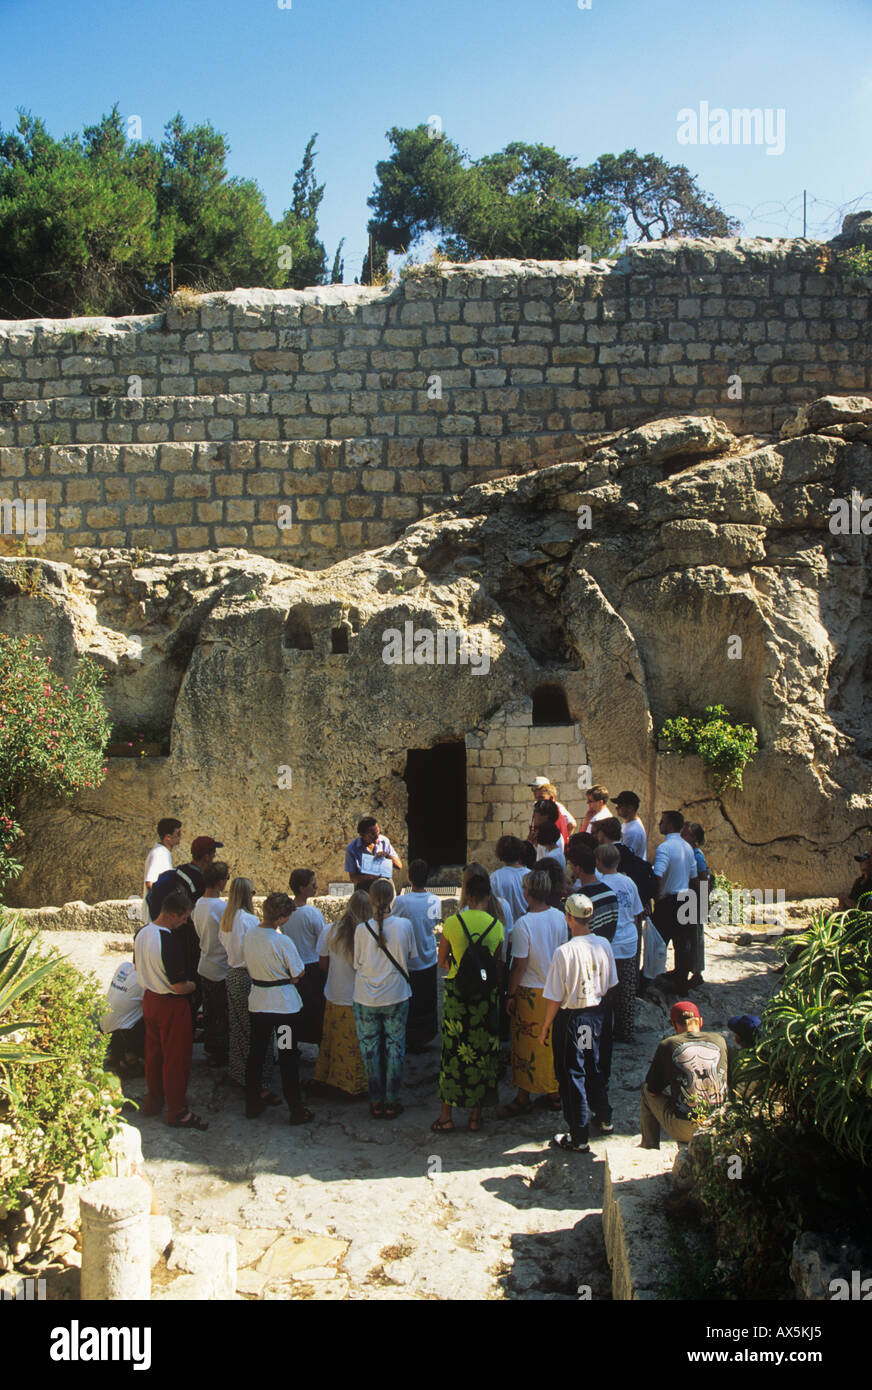 A Christian religious tour group visiting the `Garden Tomb` in Jerusalem believed to be the site of the burial and resurrection of Jesus. Stock Photo